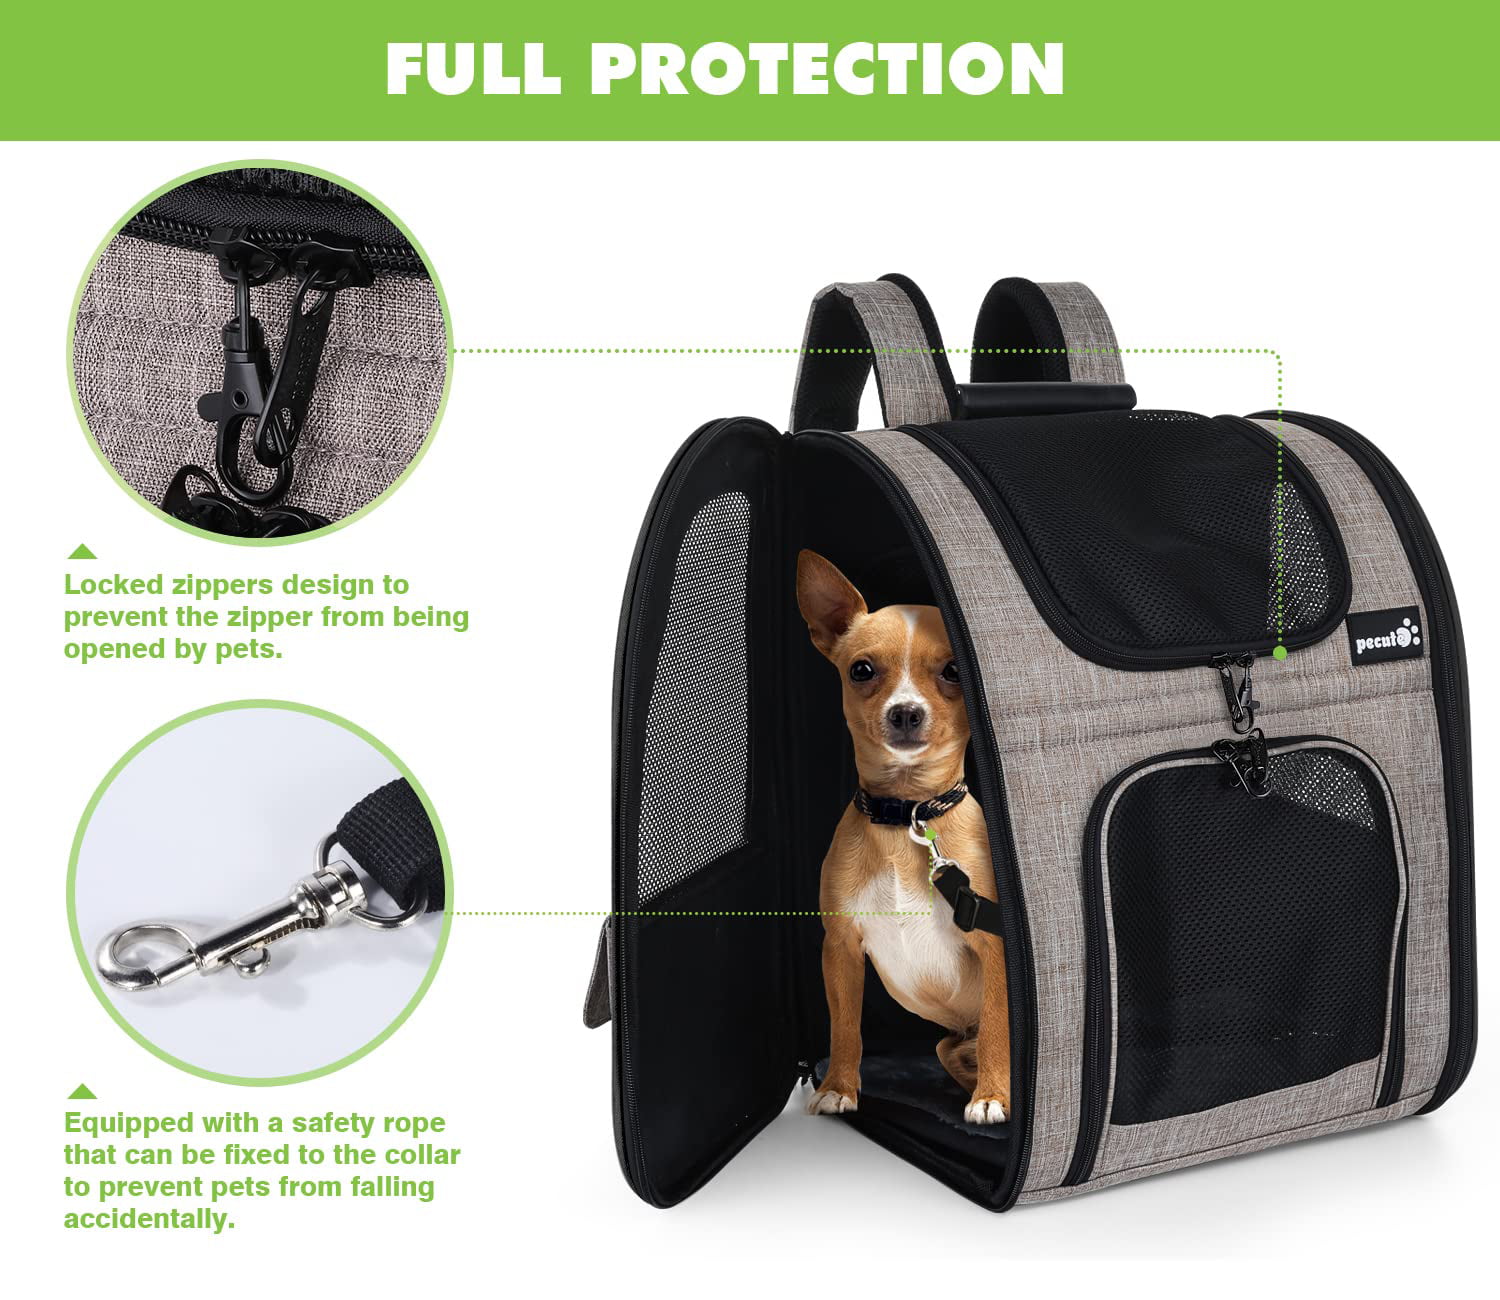 The Best Cat Backpack Carrier: An Honest Pecute Backpack Review For Travel!